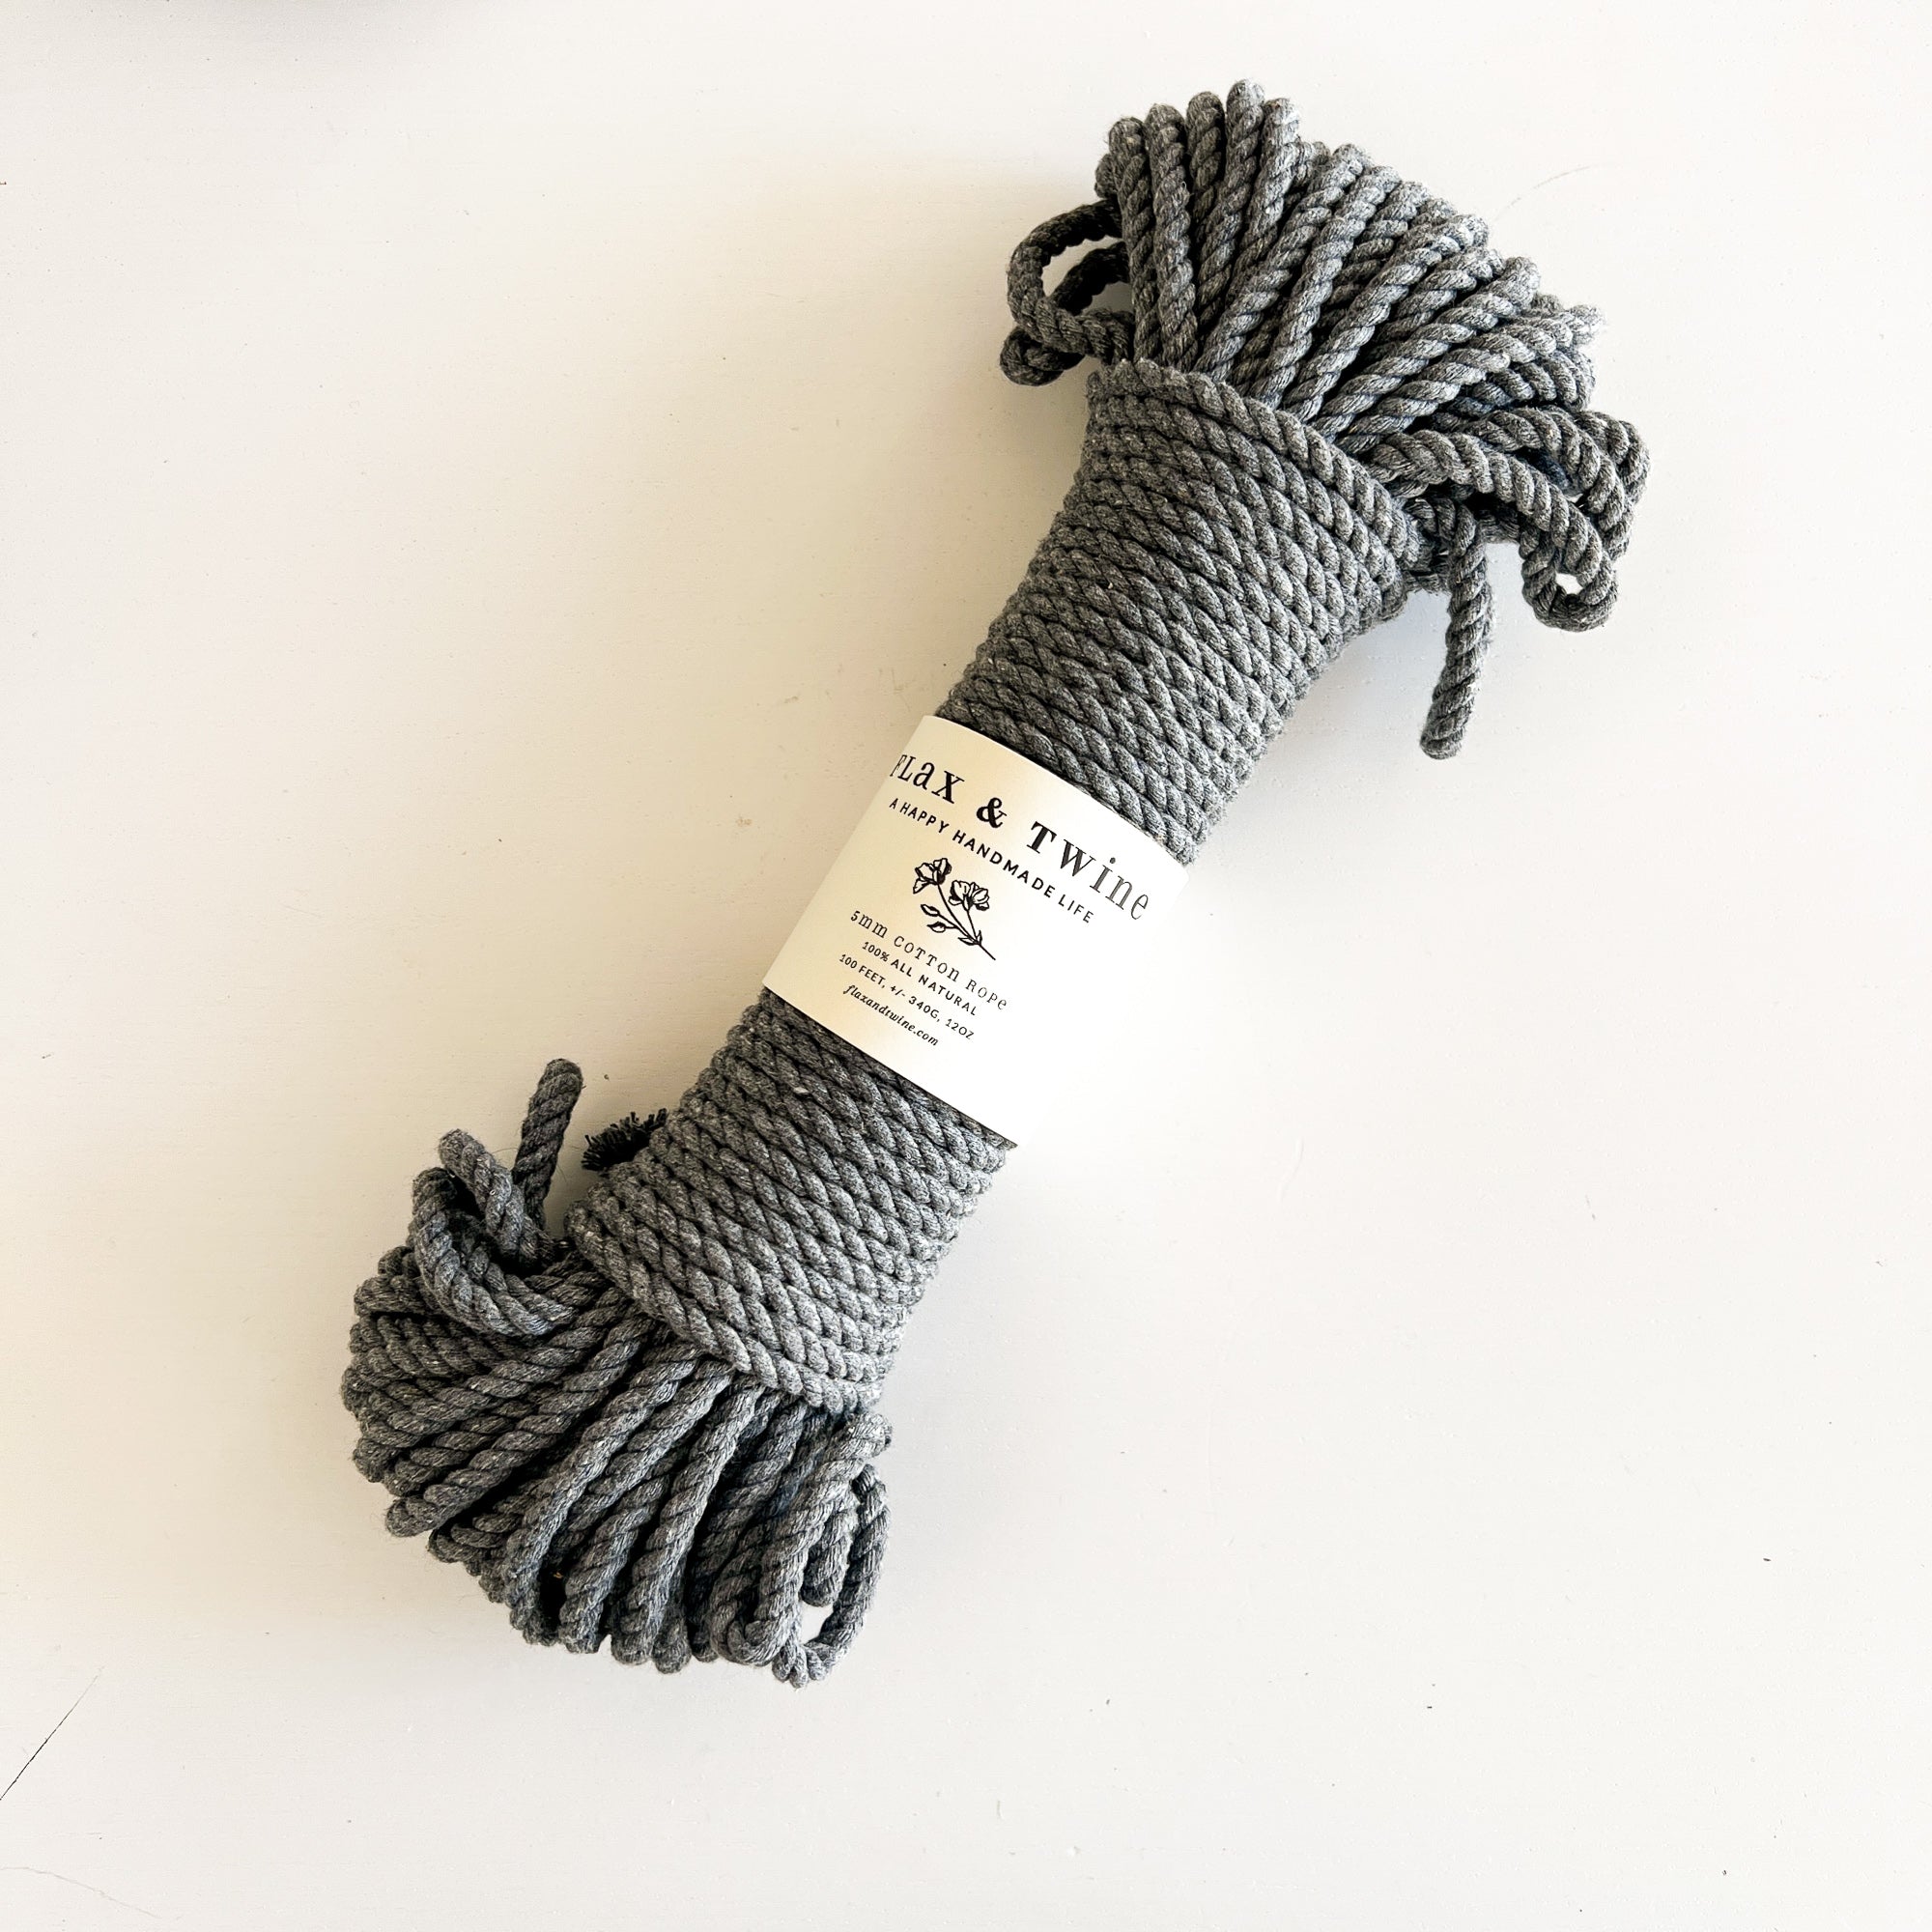 Flax & Twine Recycled 5mm Cotton Rope